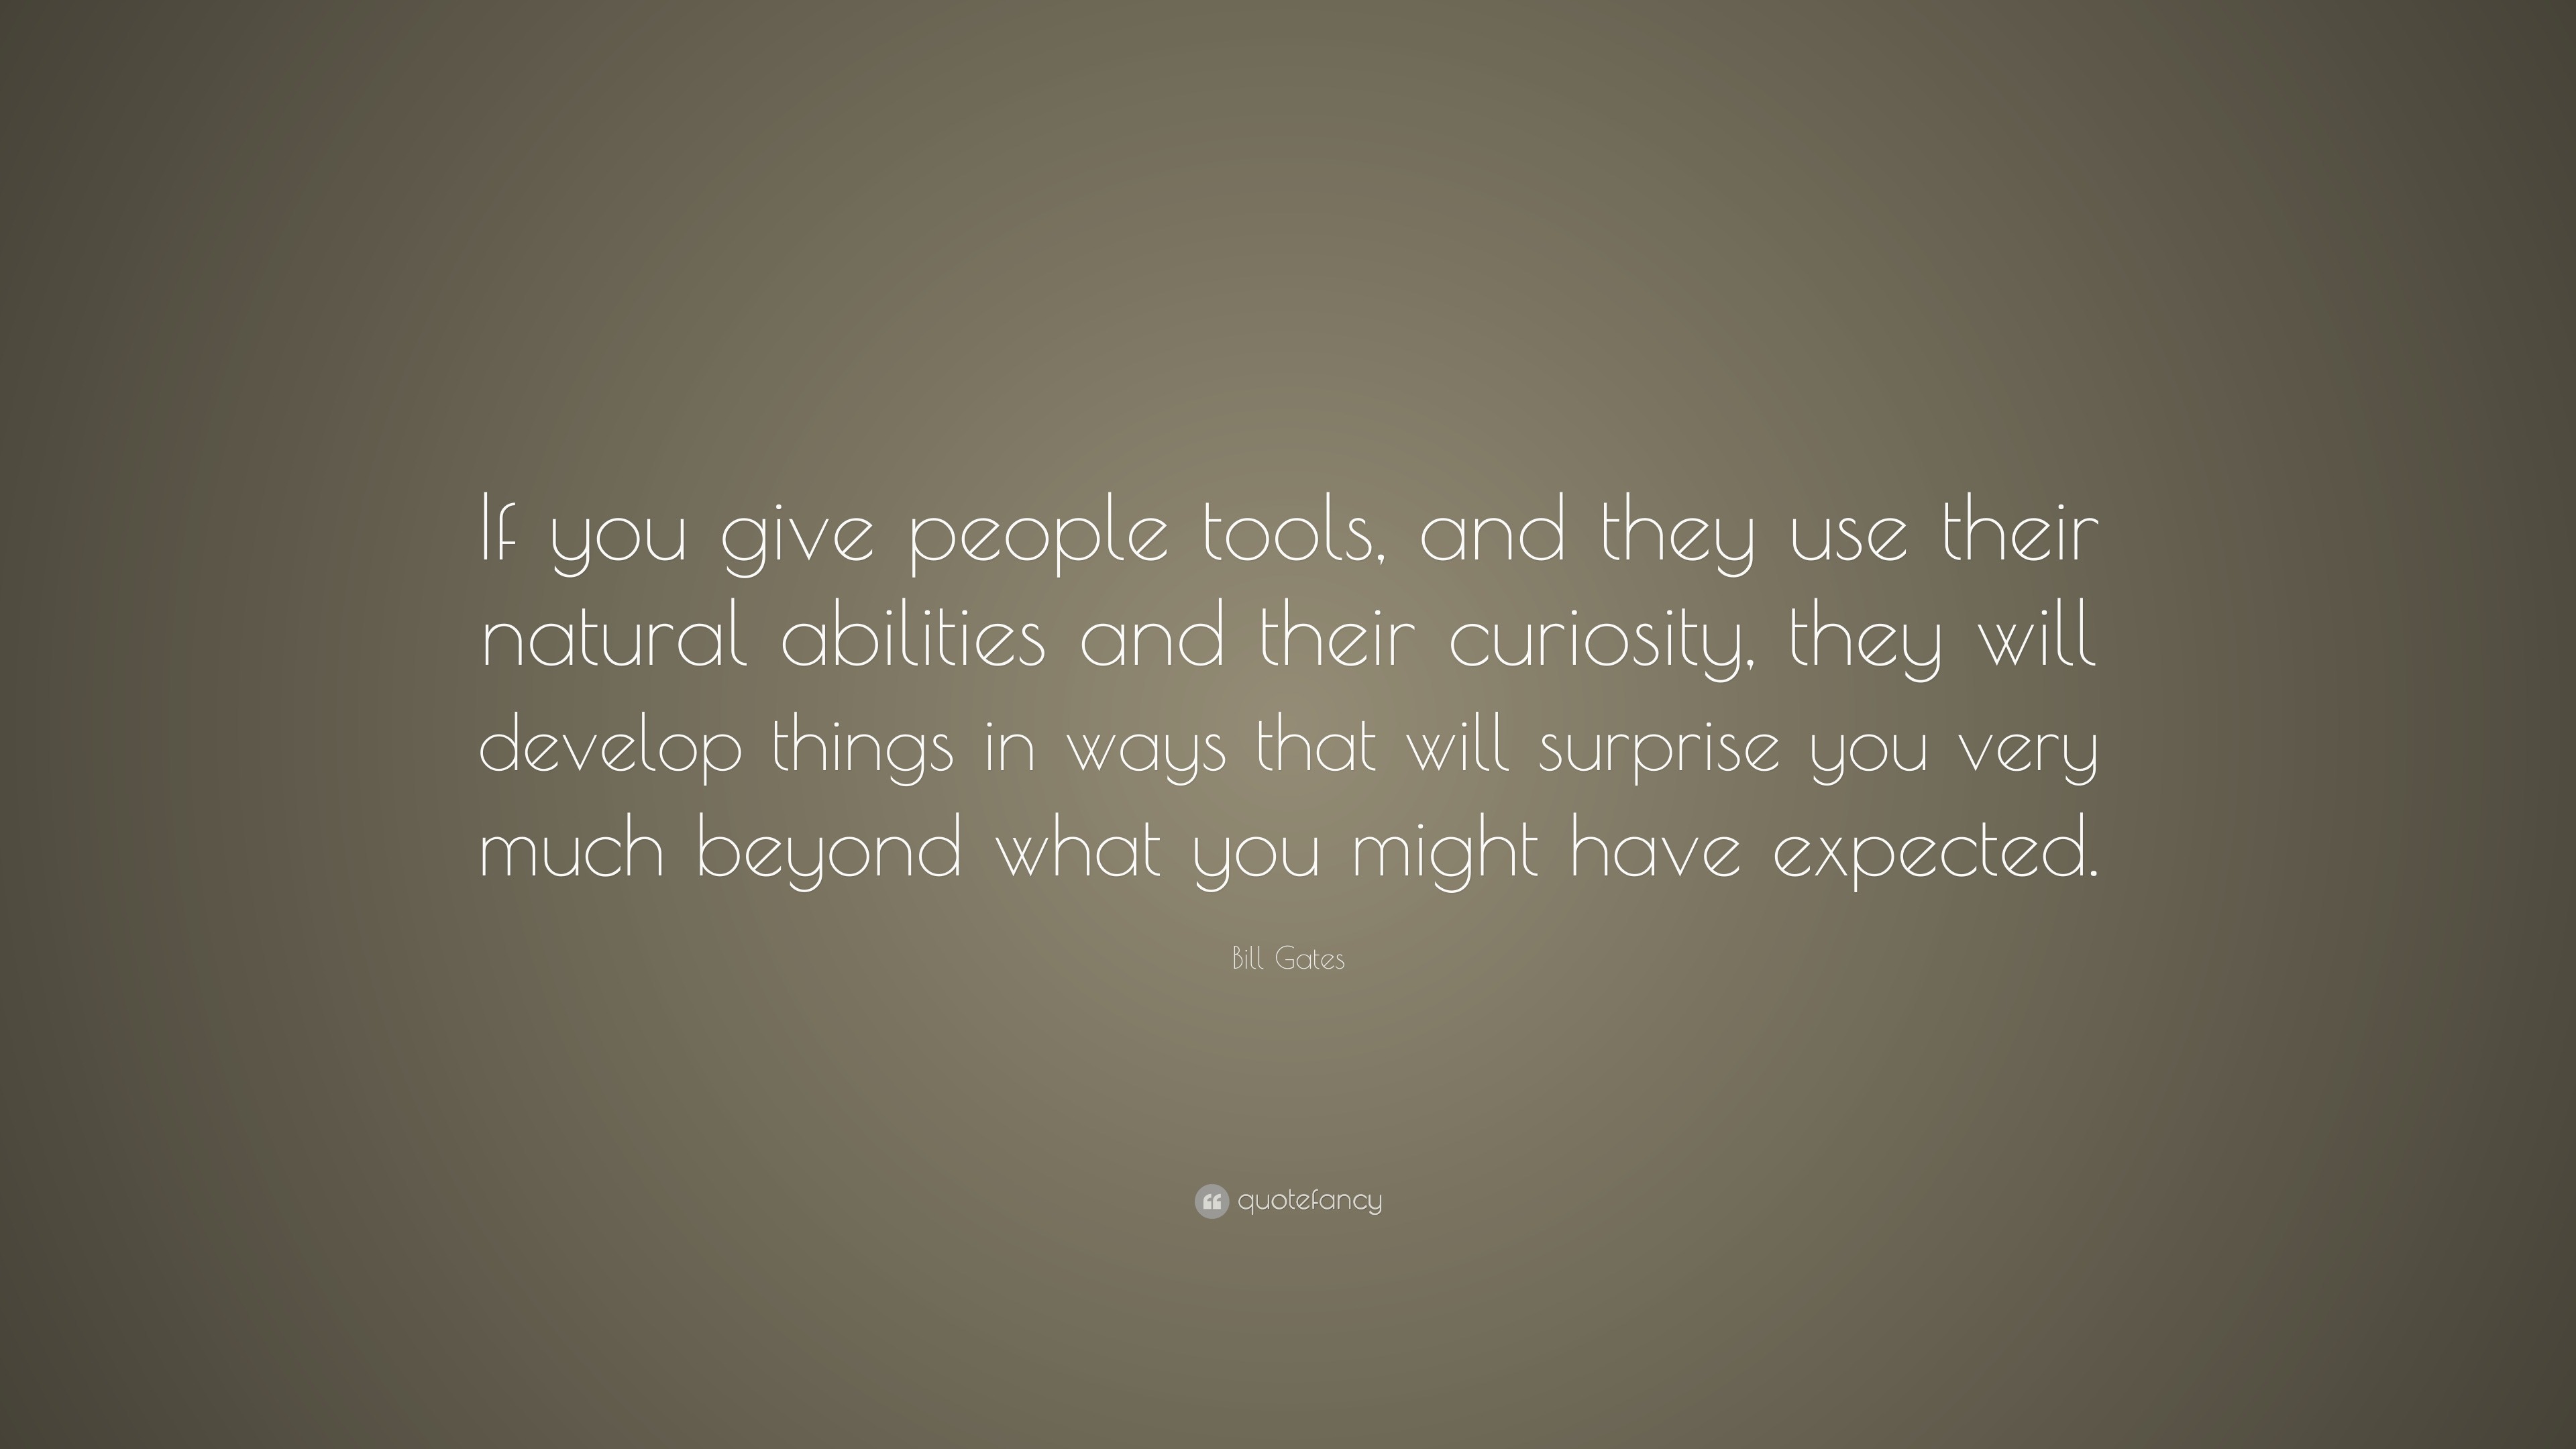 Bill Gates Quote: “If you give people tools, and they use their natural ...